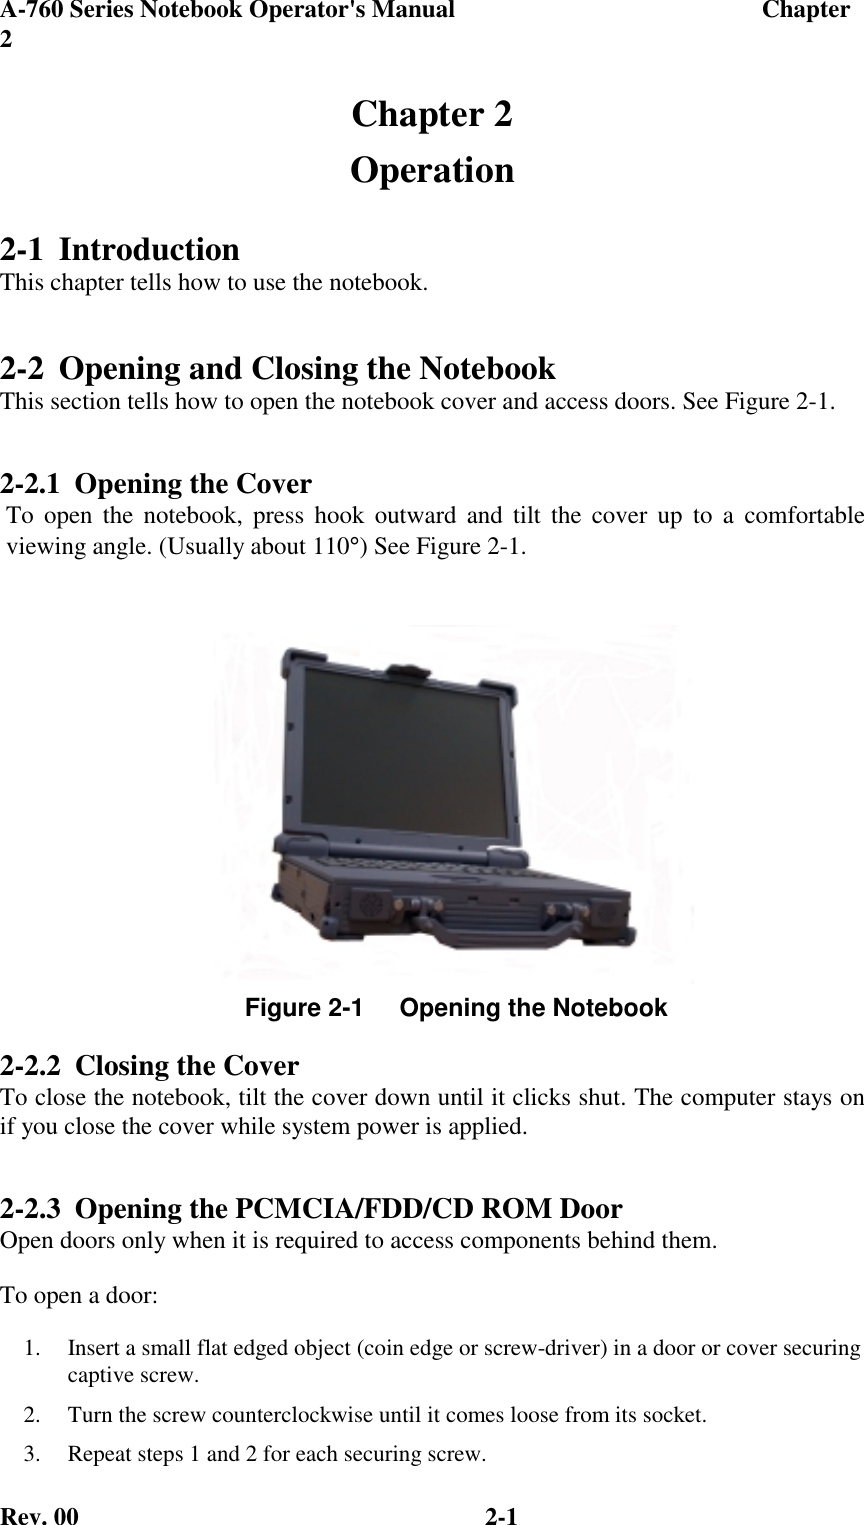 A-760 Series Notebook Operator&apos;s Manual                                 Chapter2Rev. 00 2-1Chapter 2Operation2-1 IntroductionThis chapter tells how to use the notebook.2-2 Opening and Closing the NotebookThis section tells how to open the notebook cover and access doors. See Figure 2-1.2-2.1 Opening the Cover To open the notebook, press hook outward and tilt the cover up to a comfortable viewing angle. (Usually about 110°) See Figure 2-1.2-2.2 Closing the CoverTo close the notebook, tilt the cover down until it clicks shut. The computer stays onif you close the cover while system power is applied.2-2.3 Opening the PCMCIA/FDD/CD ROM DoorOpen doors only when it is required to access components behind them.To open a door:1.  Insert a small flat edged object (coin edge or screw-driver) in a door or cover securingcaptive screw.2.  Turn the screw counterclockwise until it comes loose from its socket.3.  Repeat steps 1 and 2 for each securing screw.Figure 2-1     Opening the Notebook